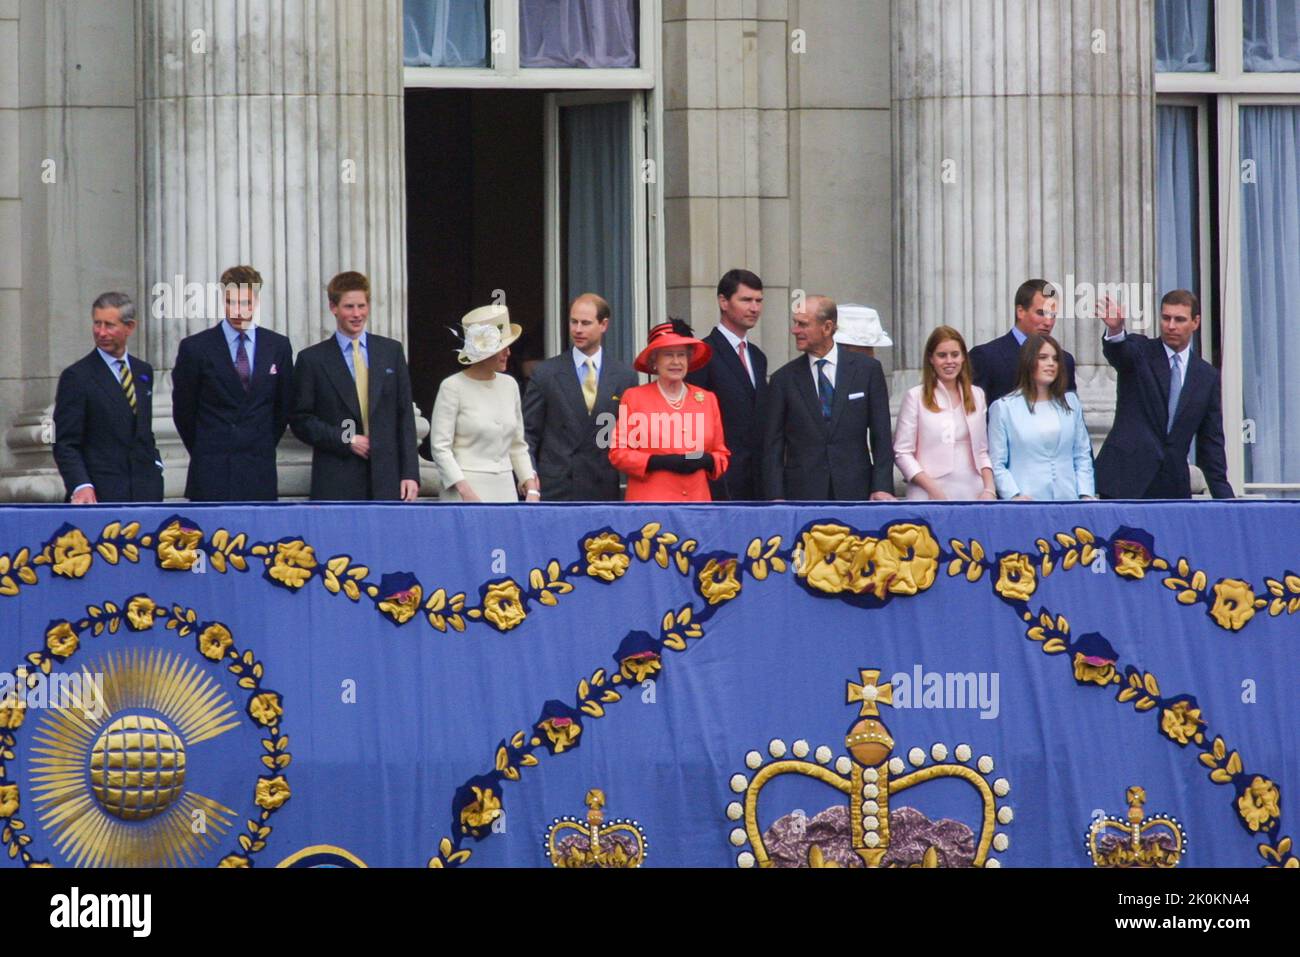 4th June 2002 - Members of the Royal Family on the balcony of  Buckingham Palace in London at the Golden Jubilee of Queen Elizabeth II Stock Photo